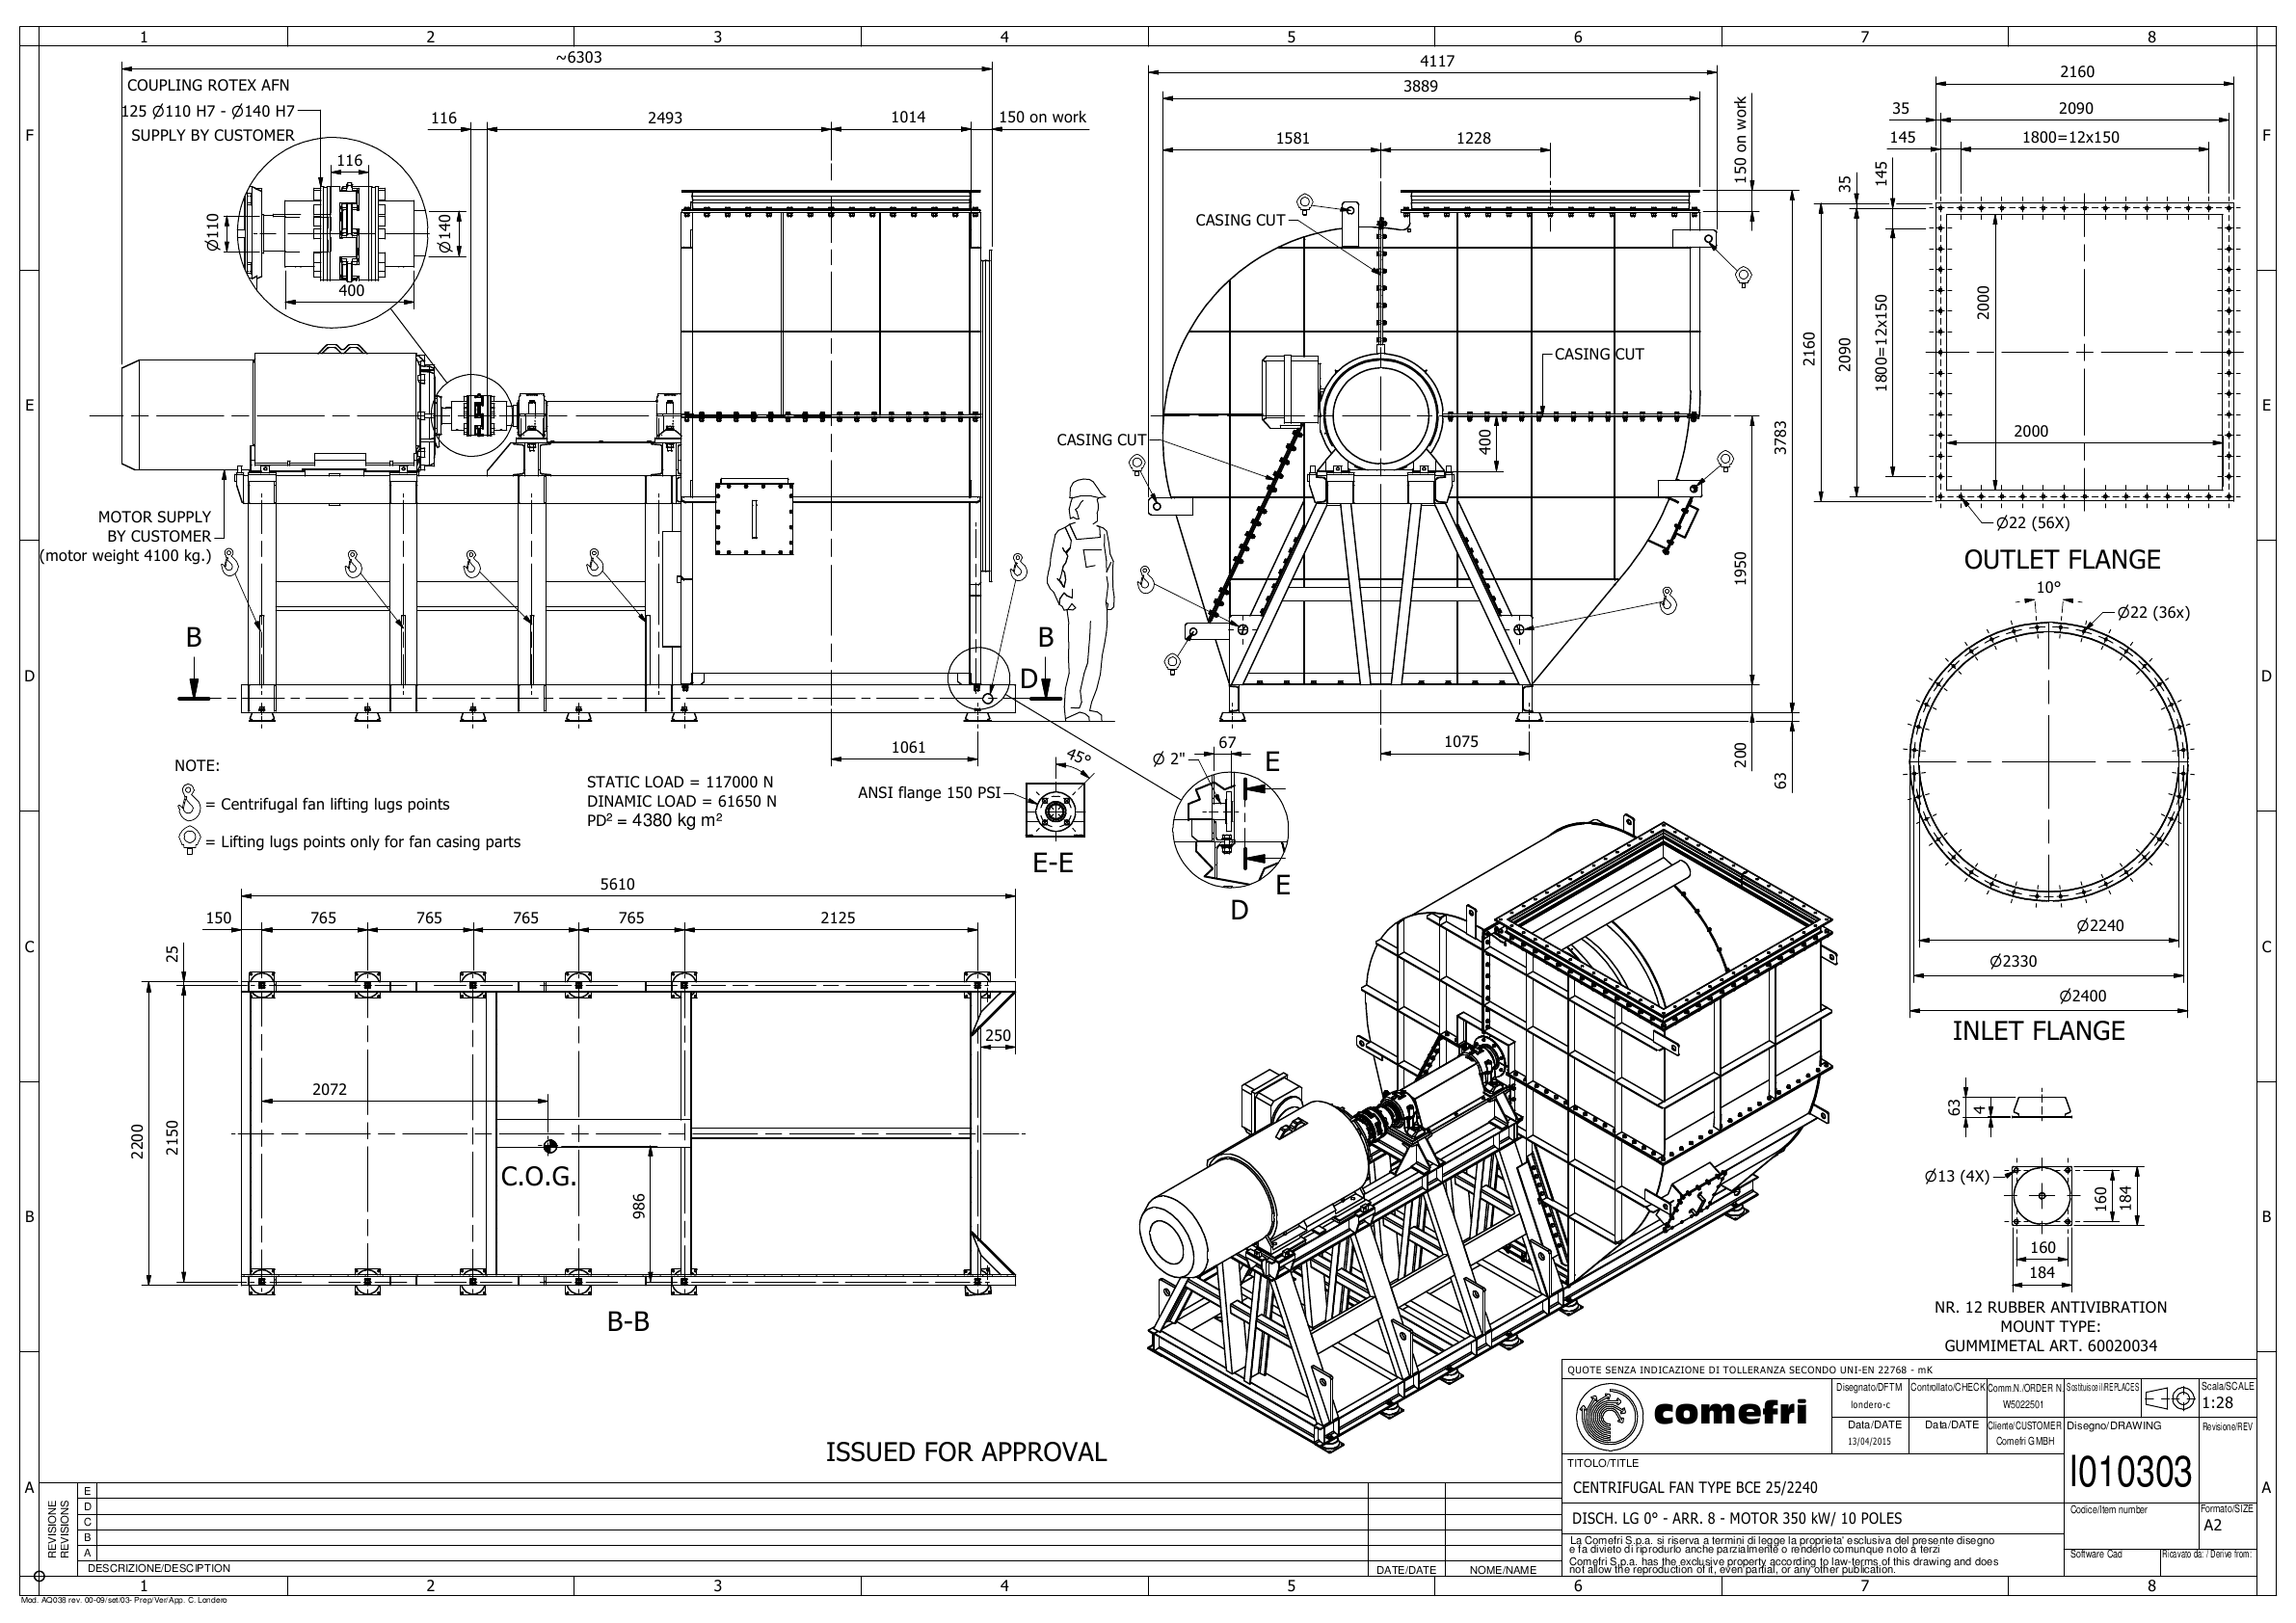 A1-Design - Design 2D for proposed gear box cover material L M,4 using  AutoCAD (Mechanical Design). #autocad you have all the details here. you  can practice and redesign it again #keep_going and